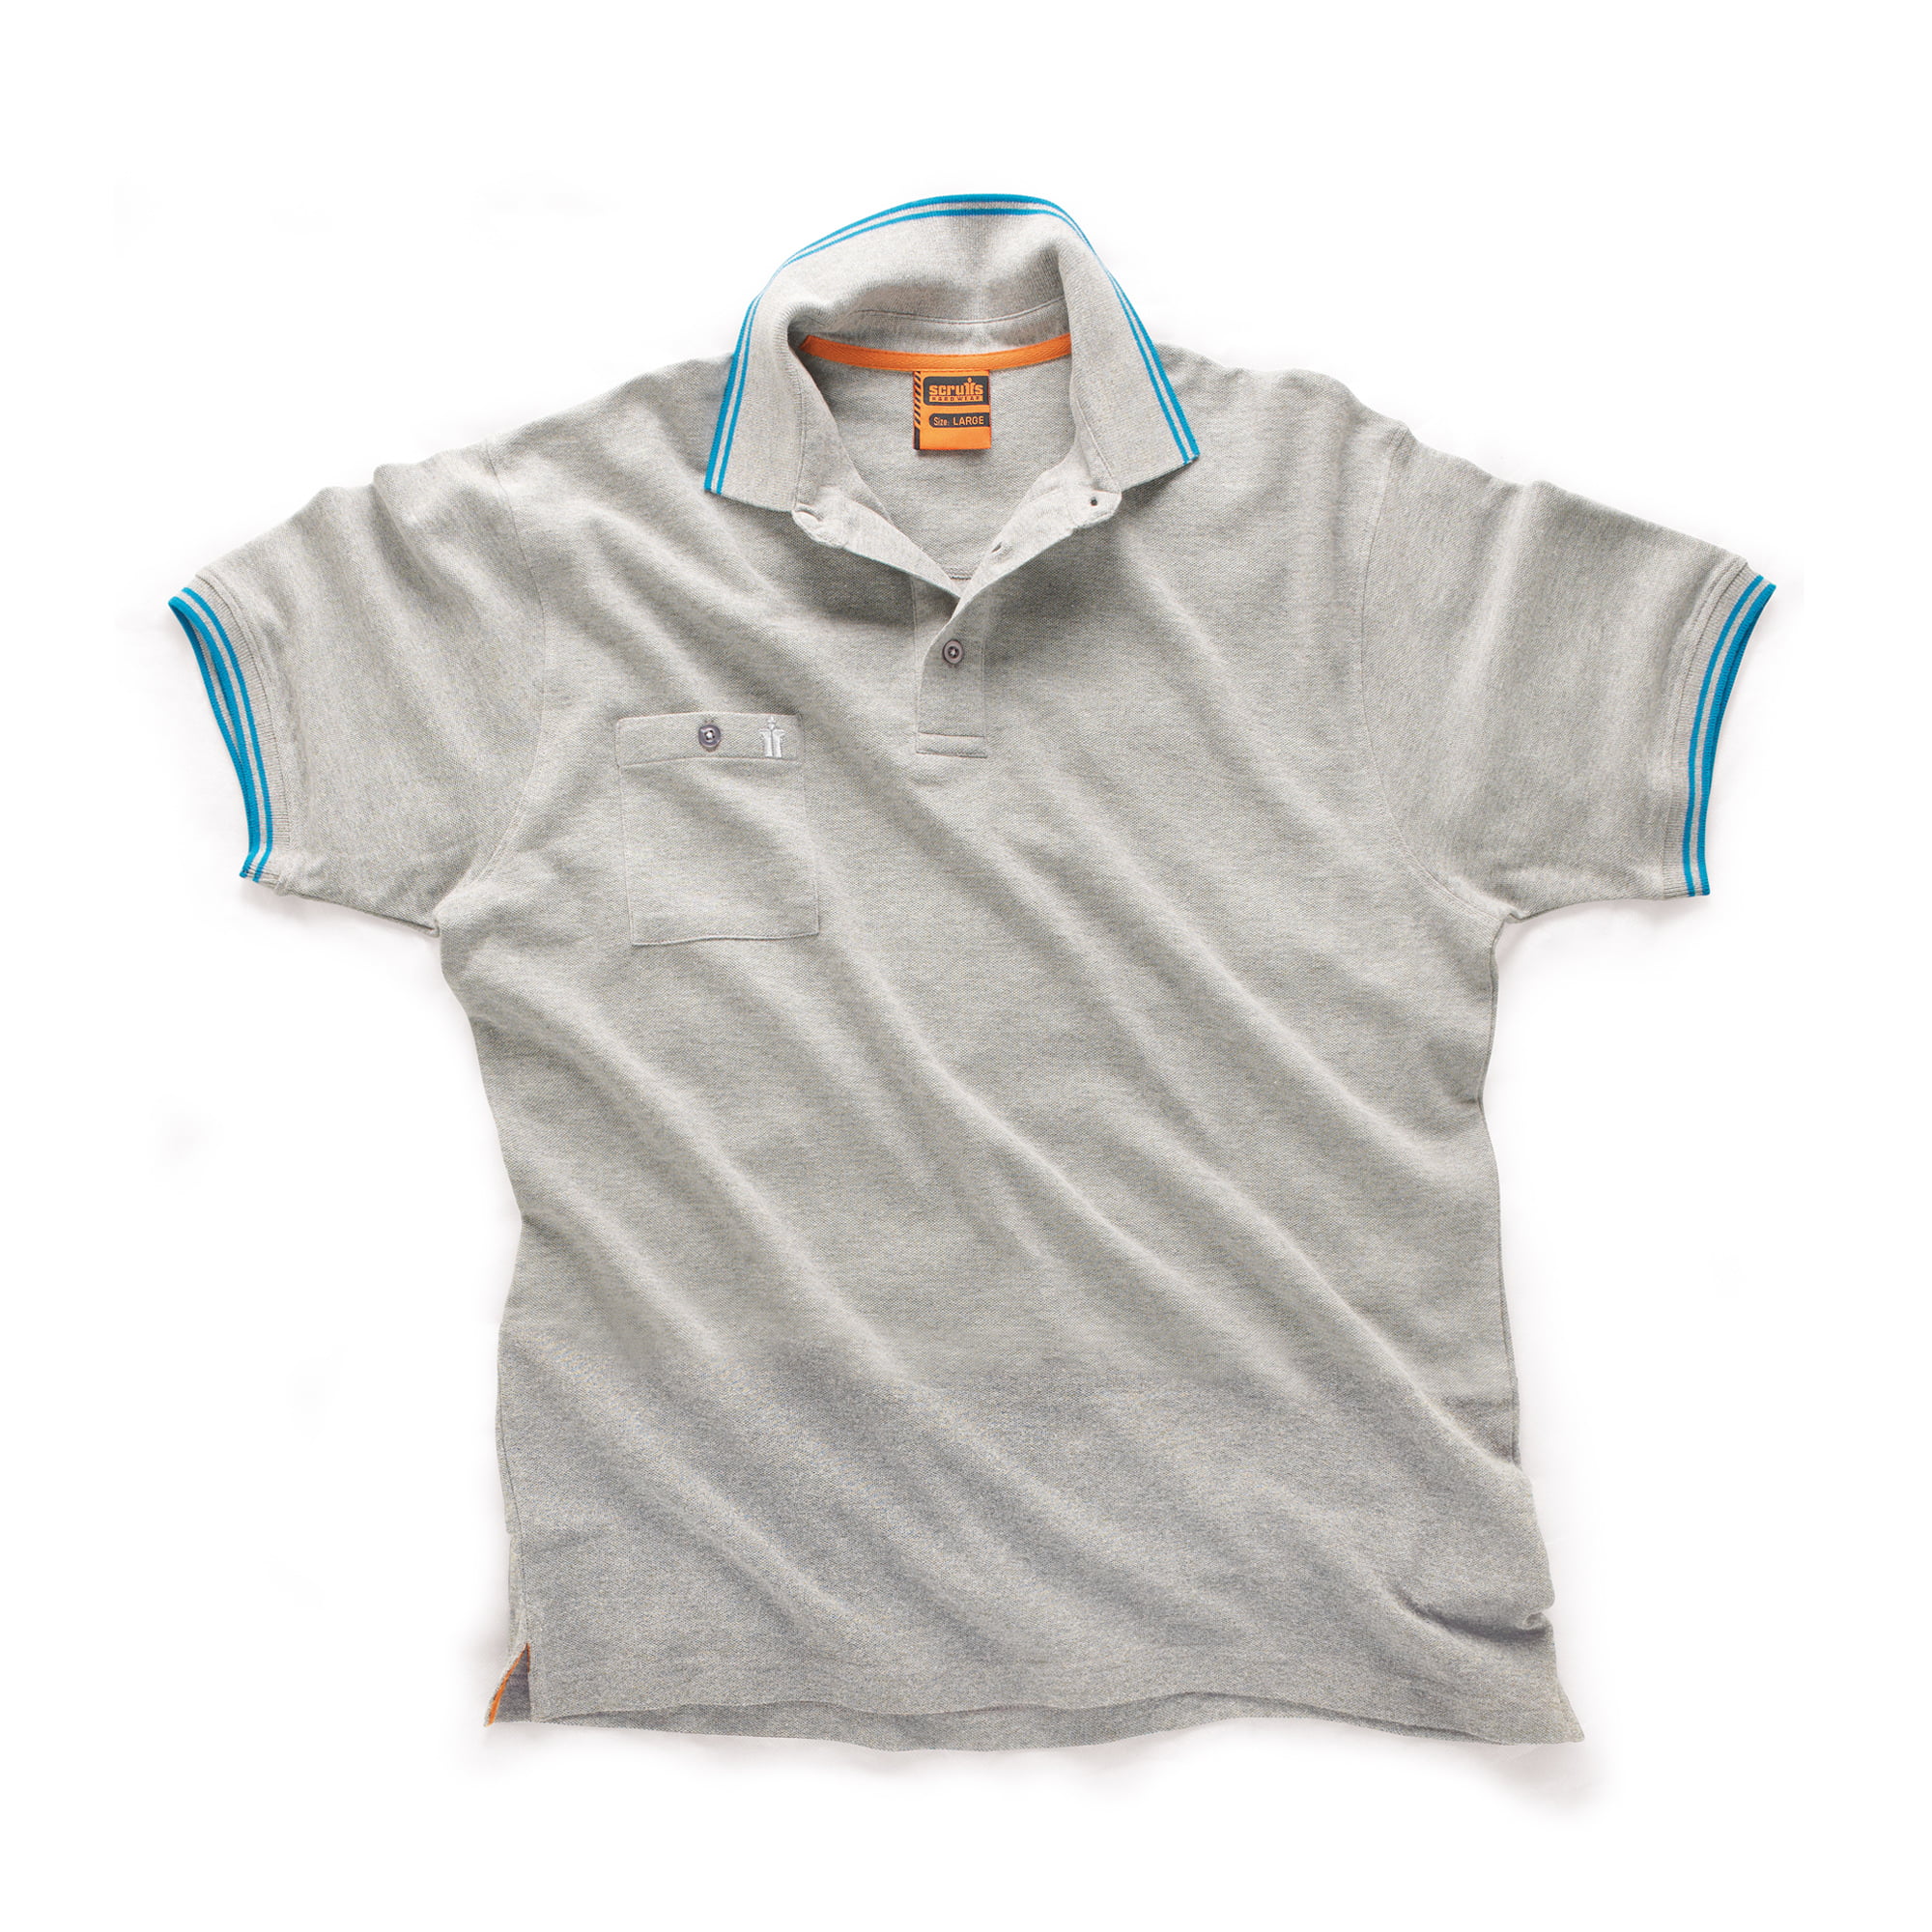 Scruffs light grey polo with blue detail on collar and sleeves